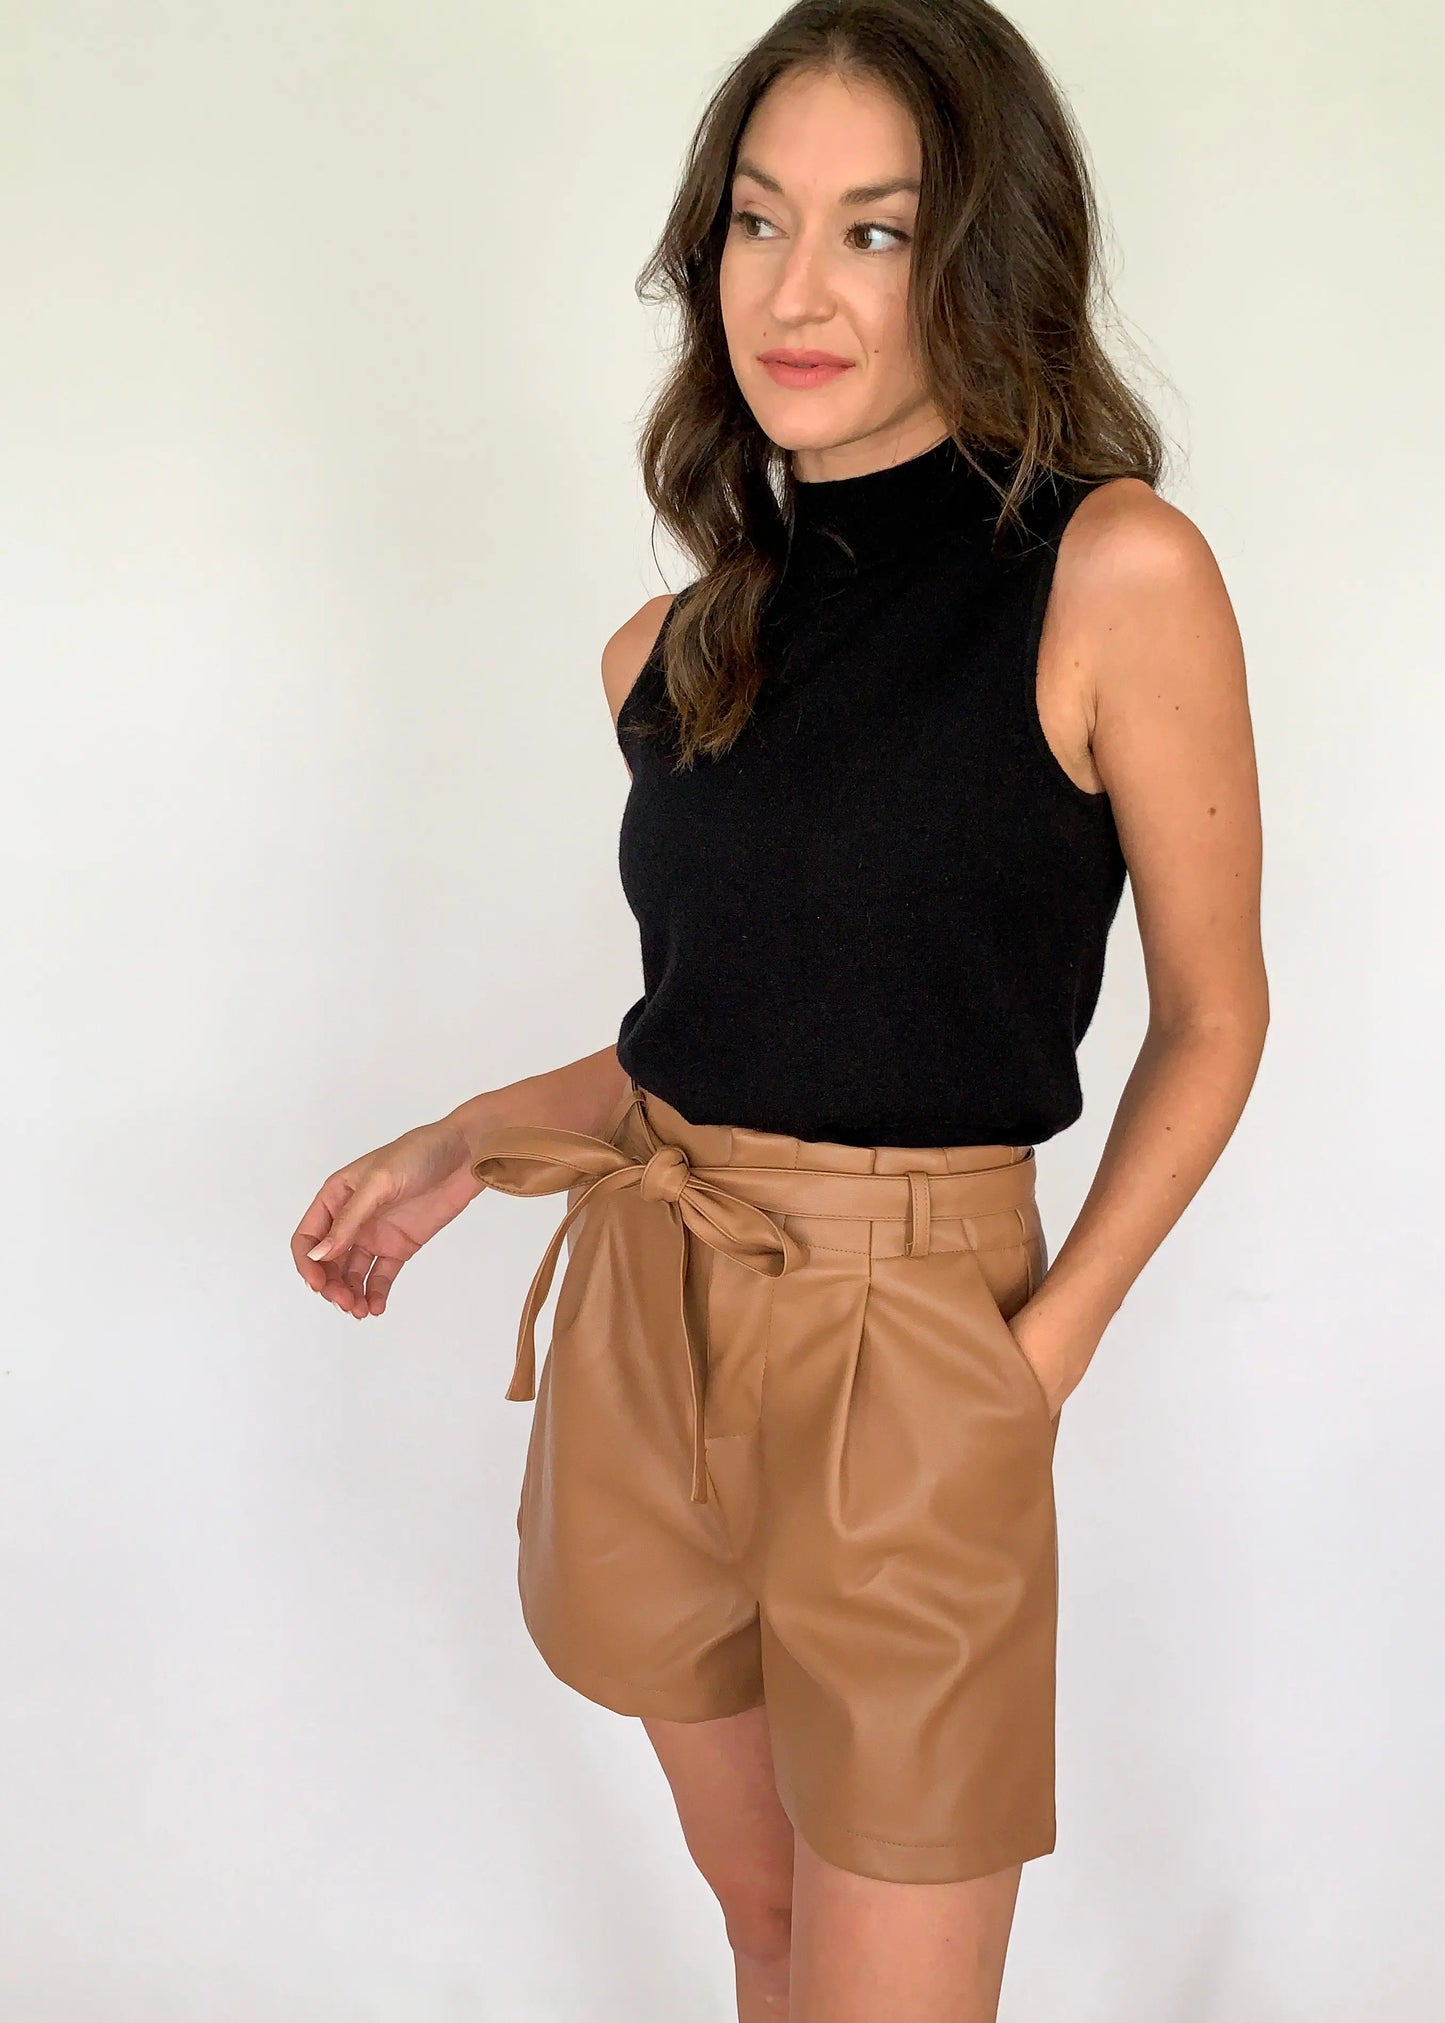 A female model dressed in a black top and large size camel leather shorts with a belt